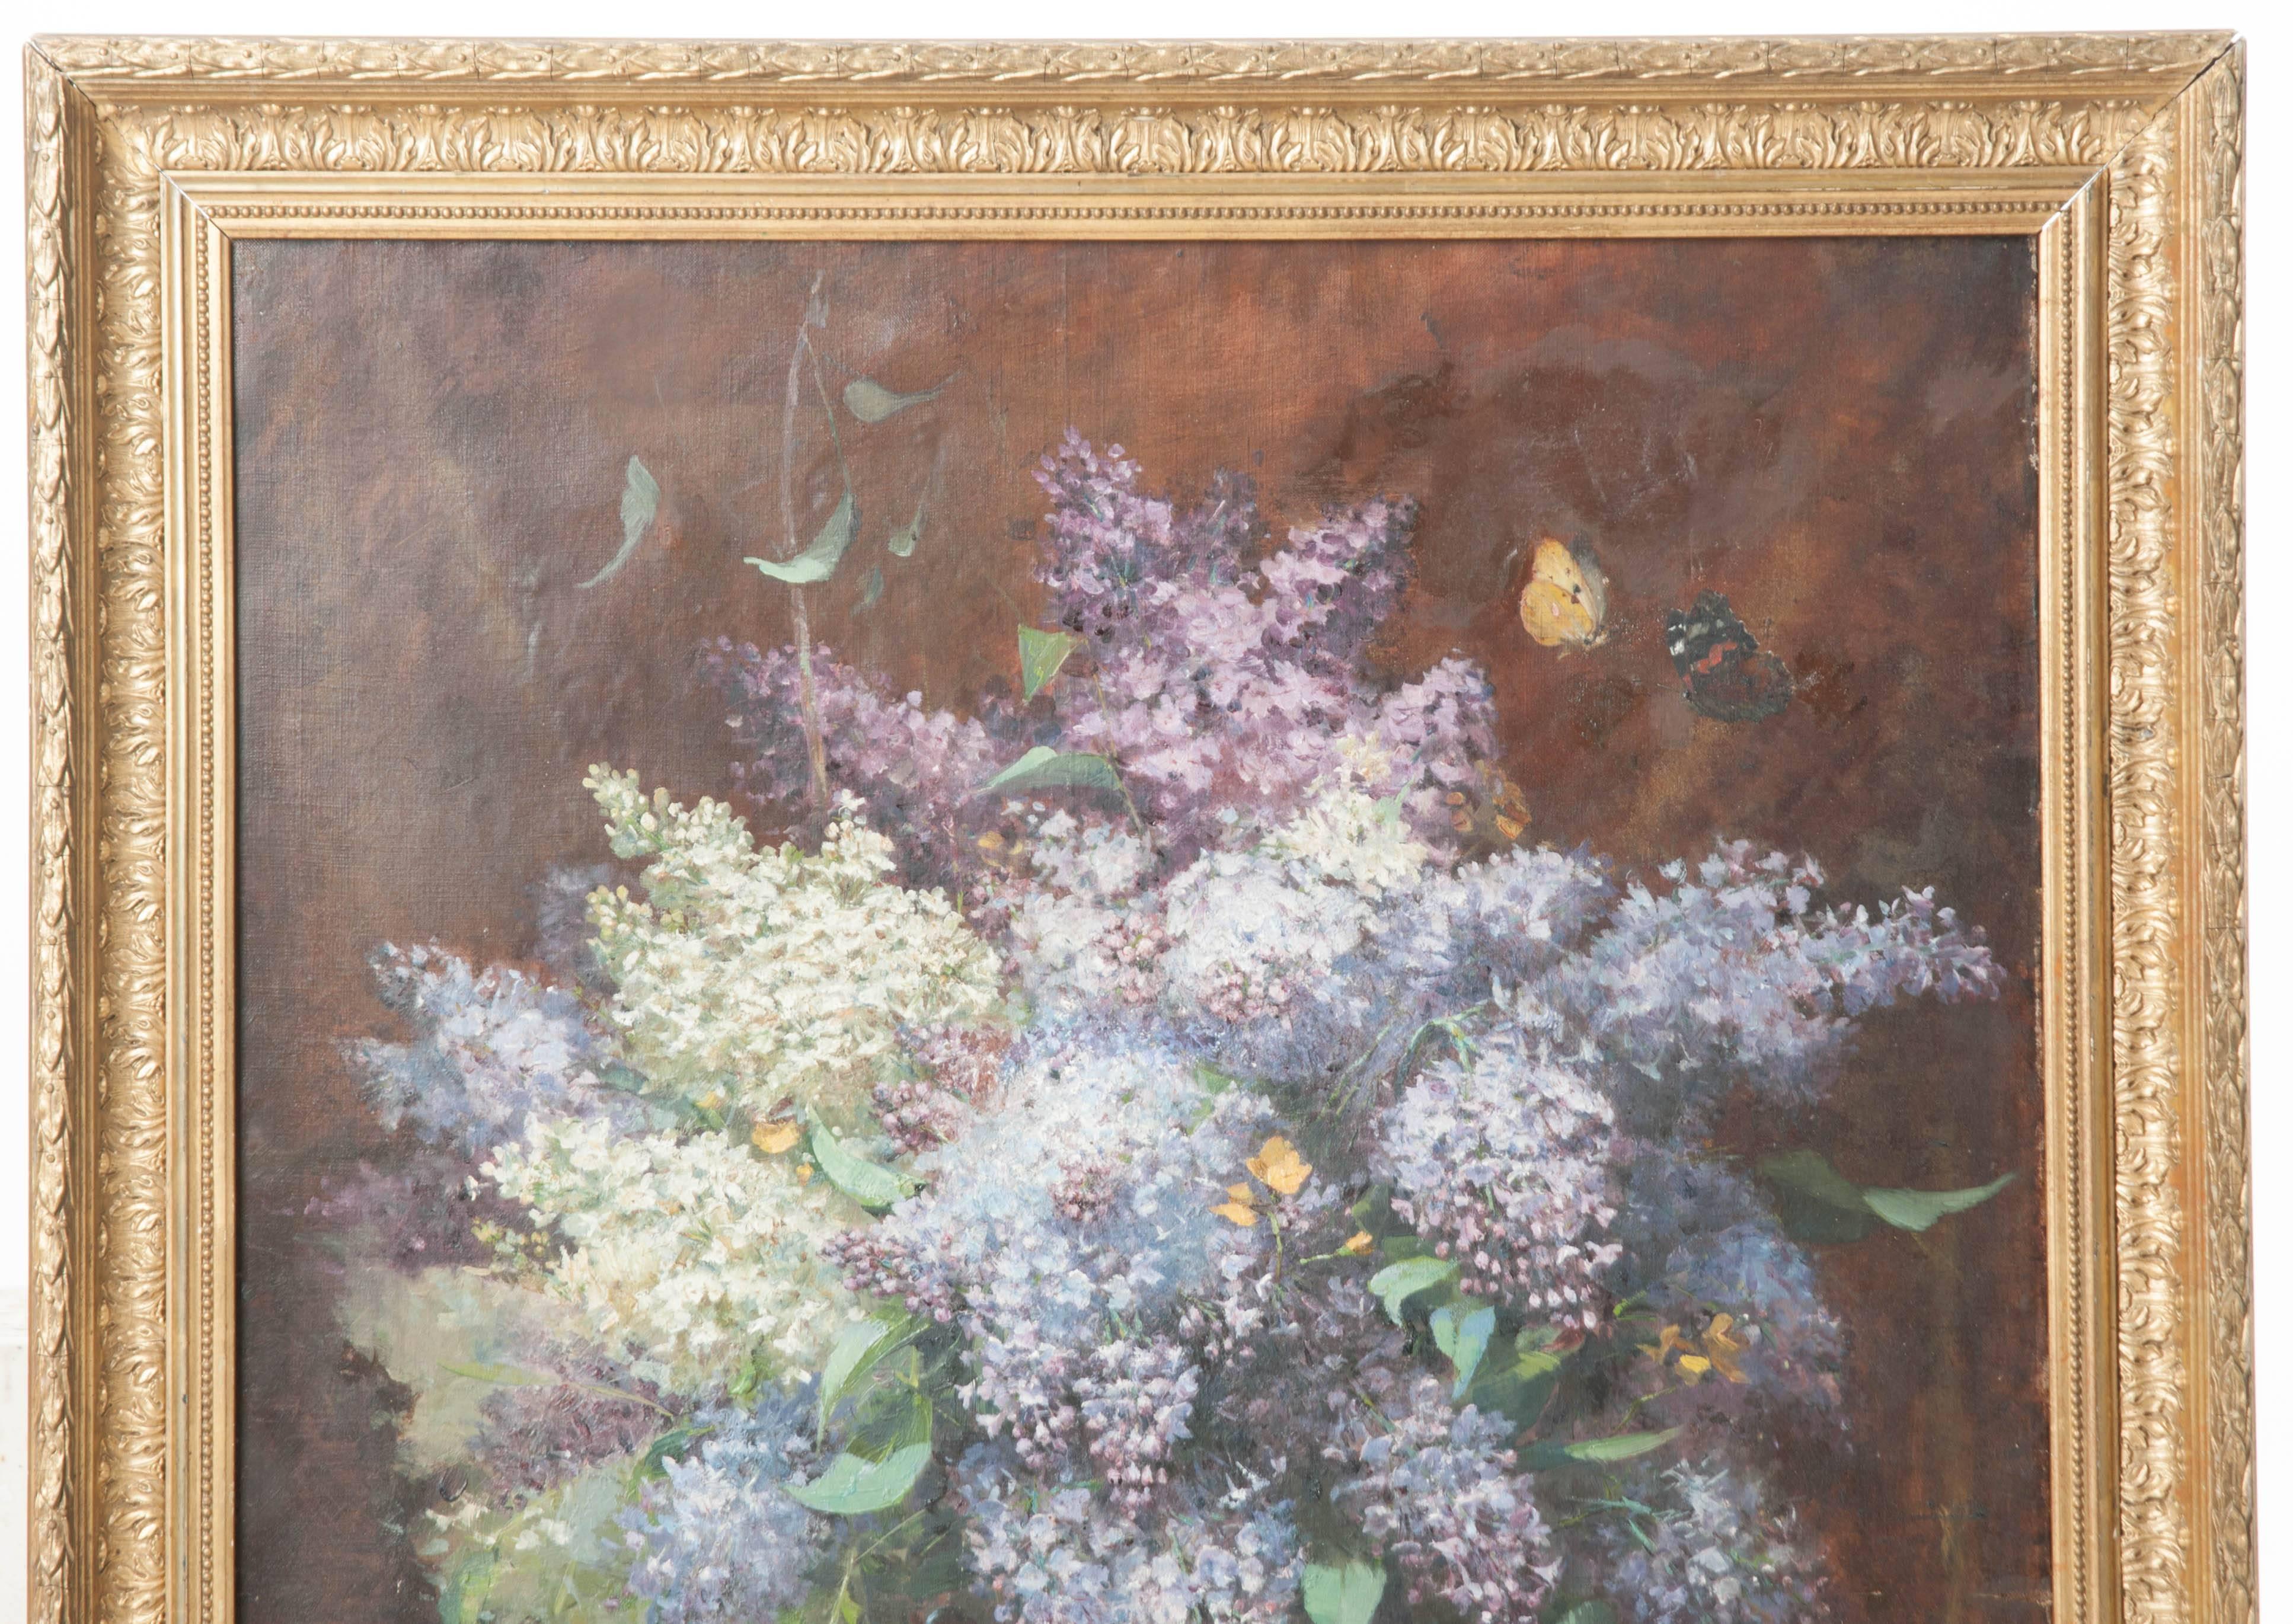 Oil on canvas. Shades of blues and purples dominate this beautiful still life depicting a tabletop vase full of wisteria. Closer inspection reveals butterflies and beetles that may be missed with a quick glance. Framed in an exquisitely carved gilt